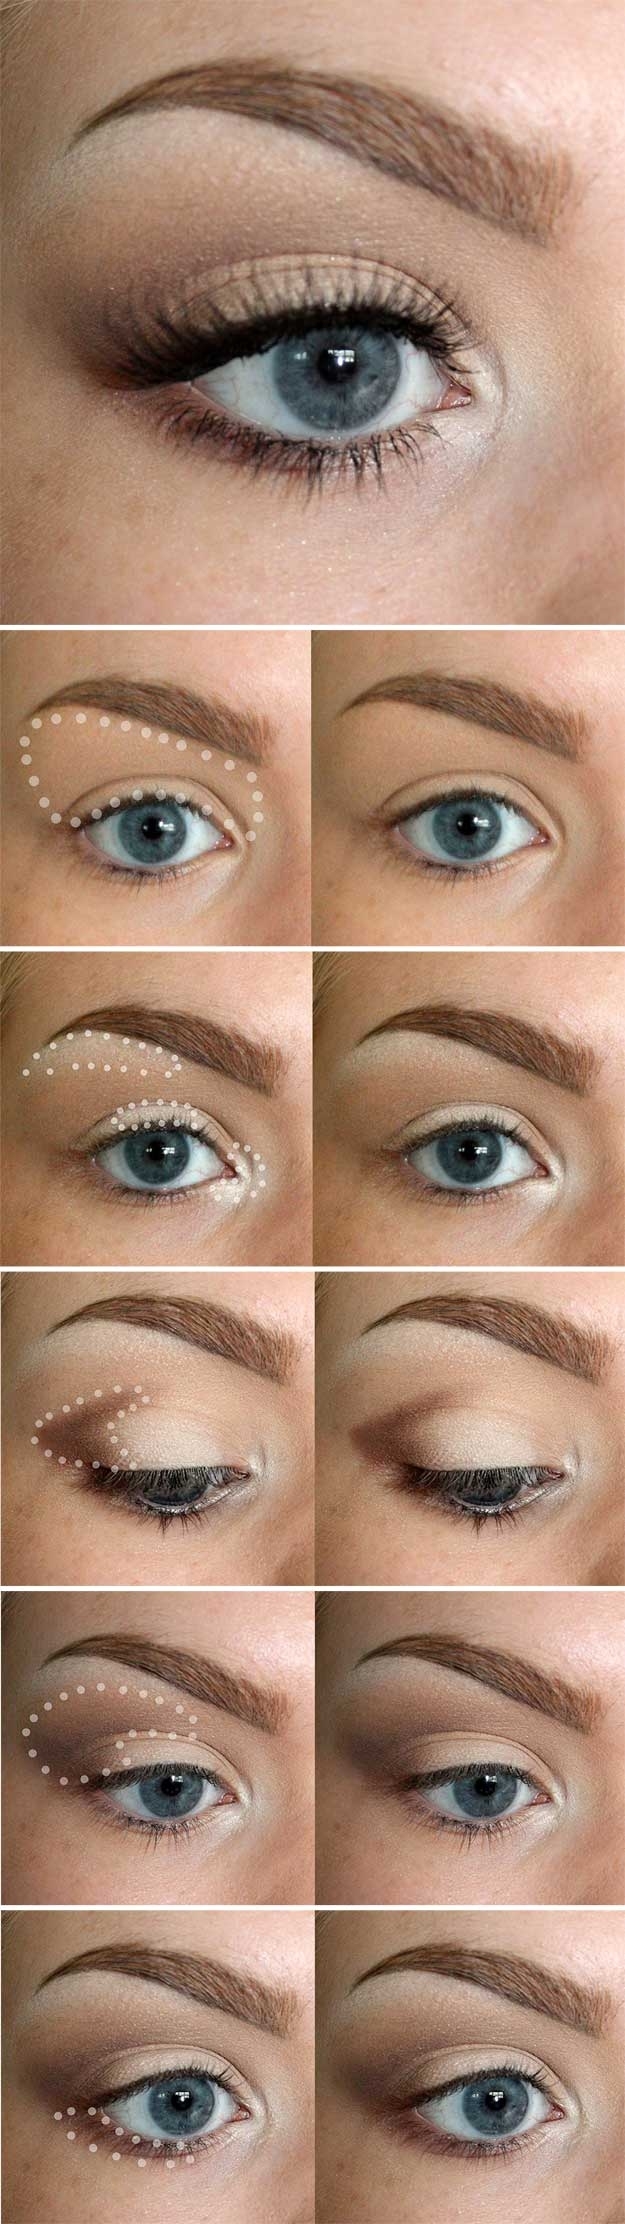 35 Wedding Makeup For Blue Eyes - The Goddess within Makeup Tutorials For Blue Eyes And Brown Hair